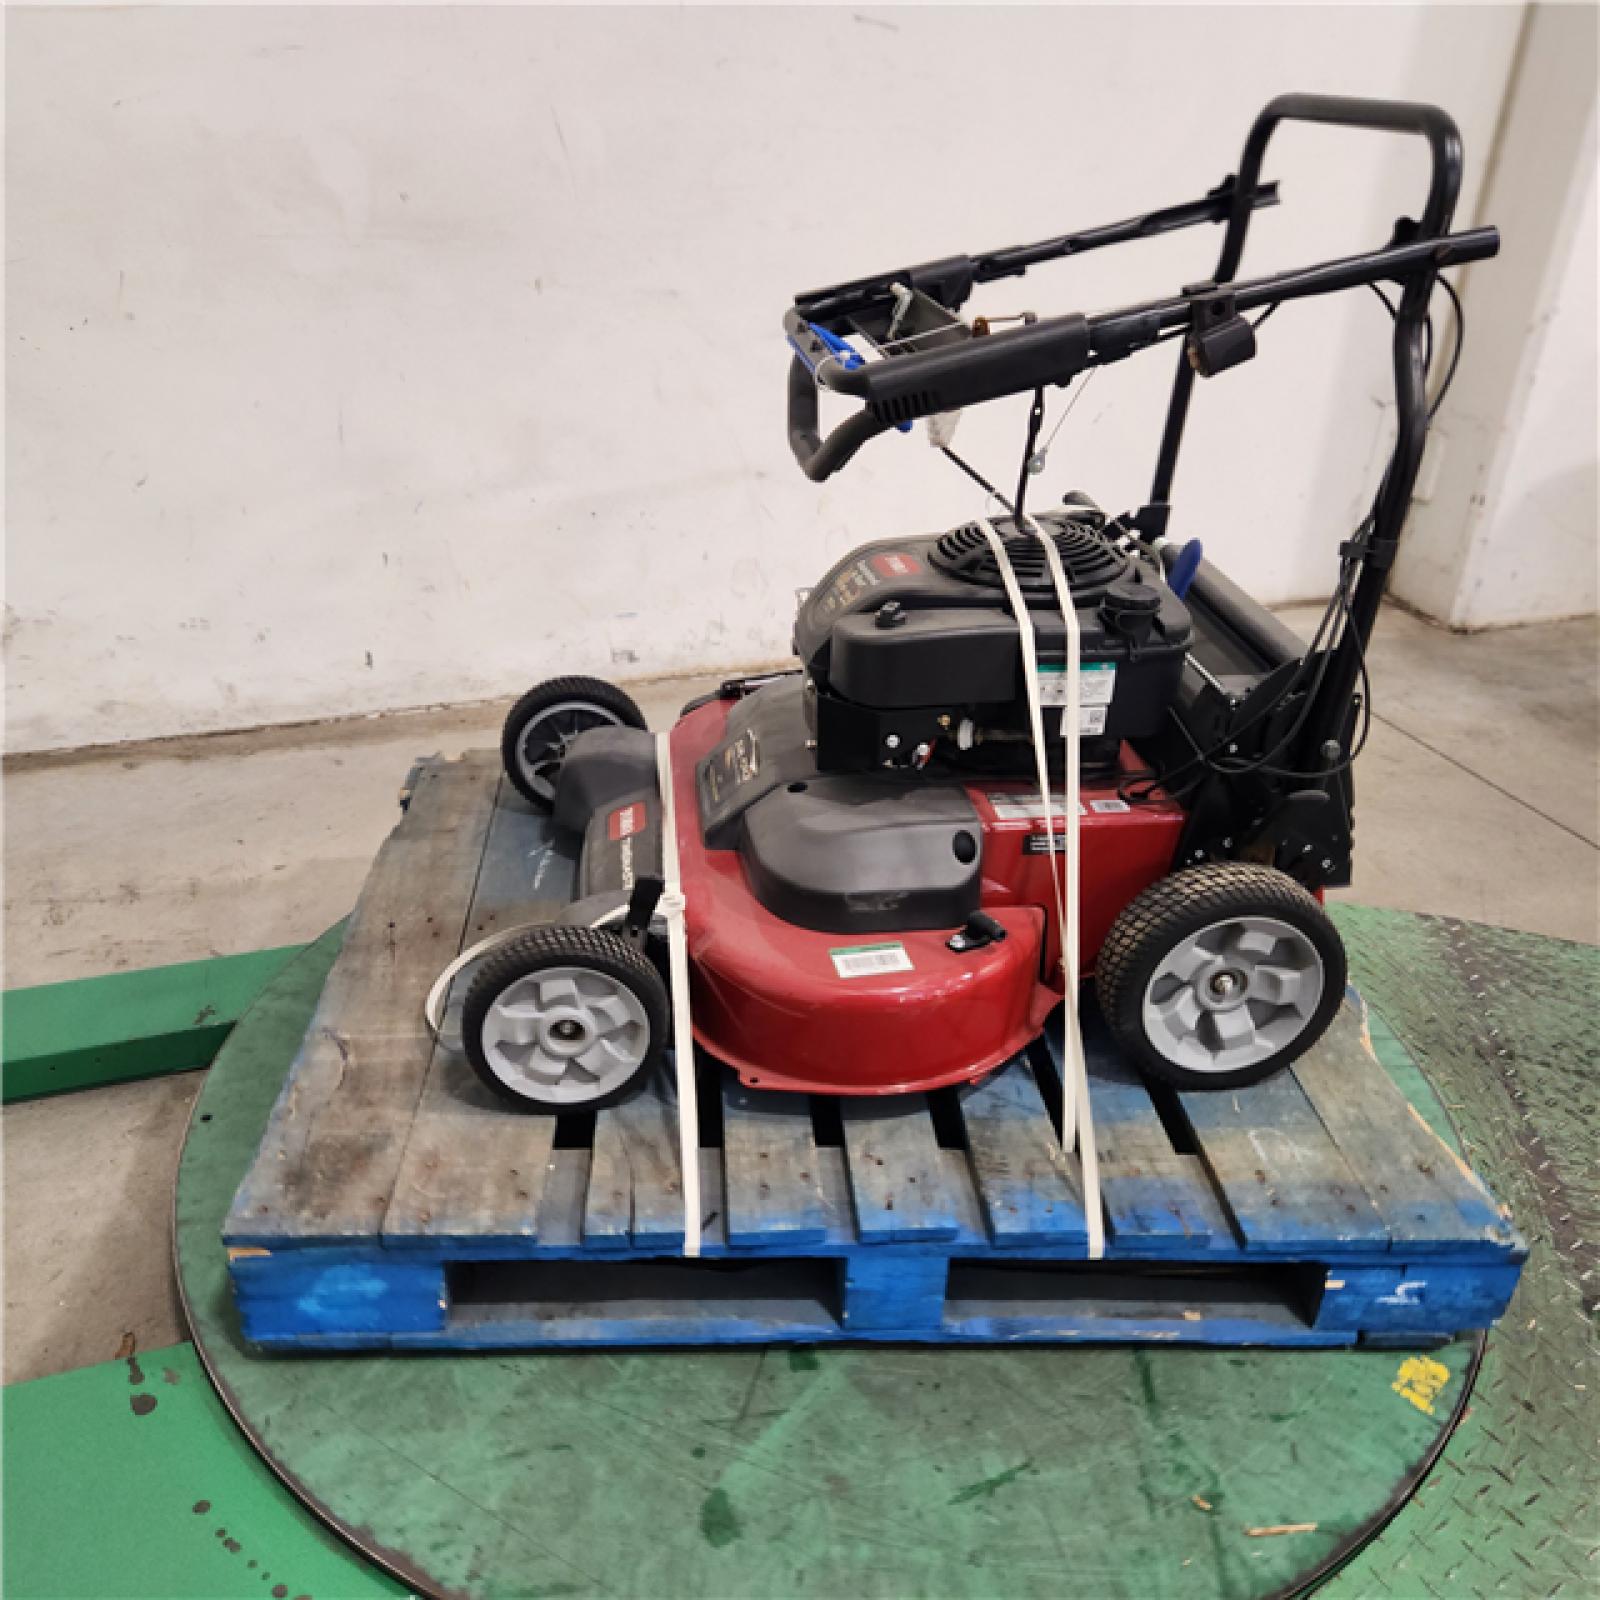 Dallas Location - As-Is Toro TimeMaster 30 in Self-Propelled Gas Lawn Mower